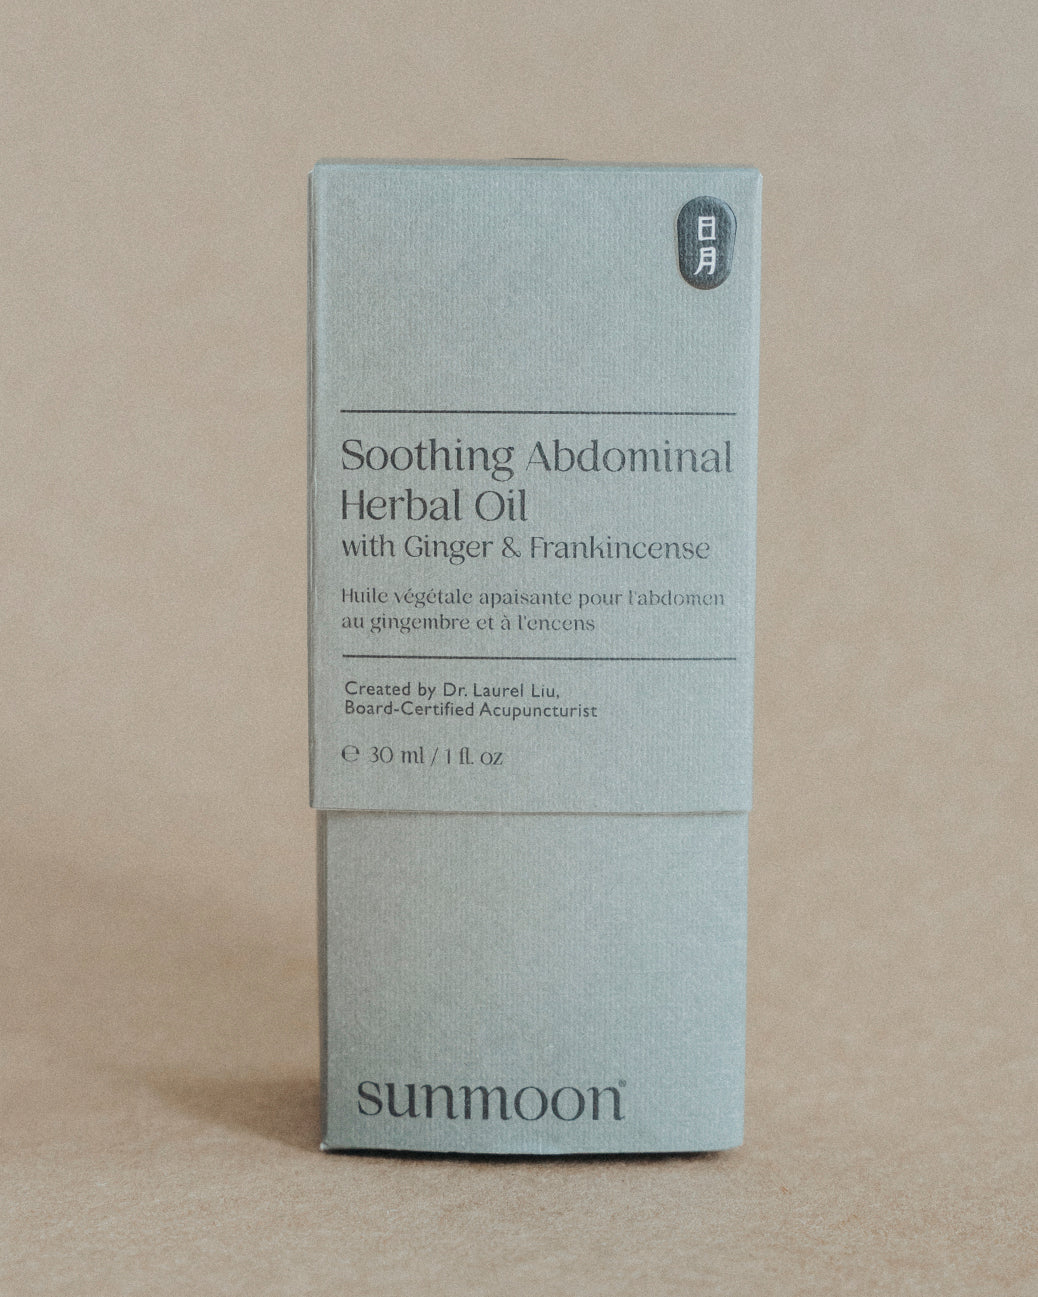 Soothing Abdominal Herbal Oil with Ginger and Frankincense